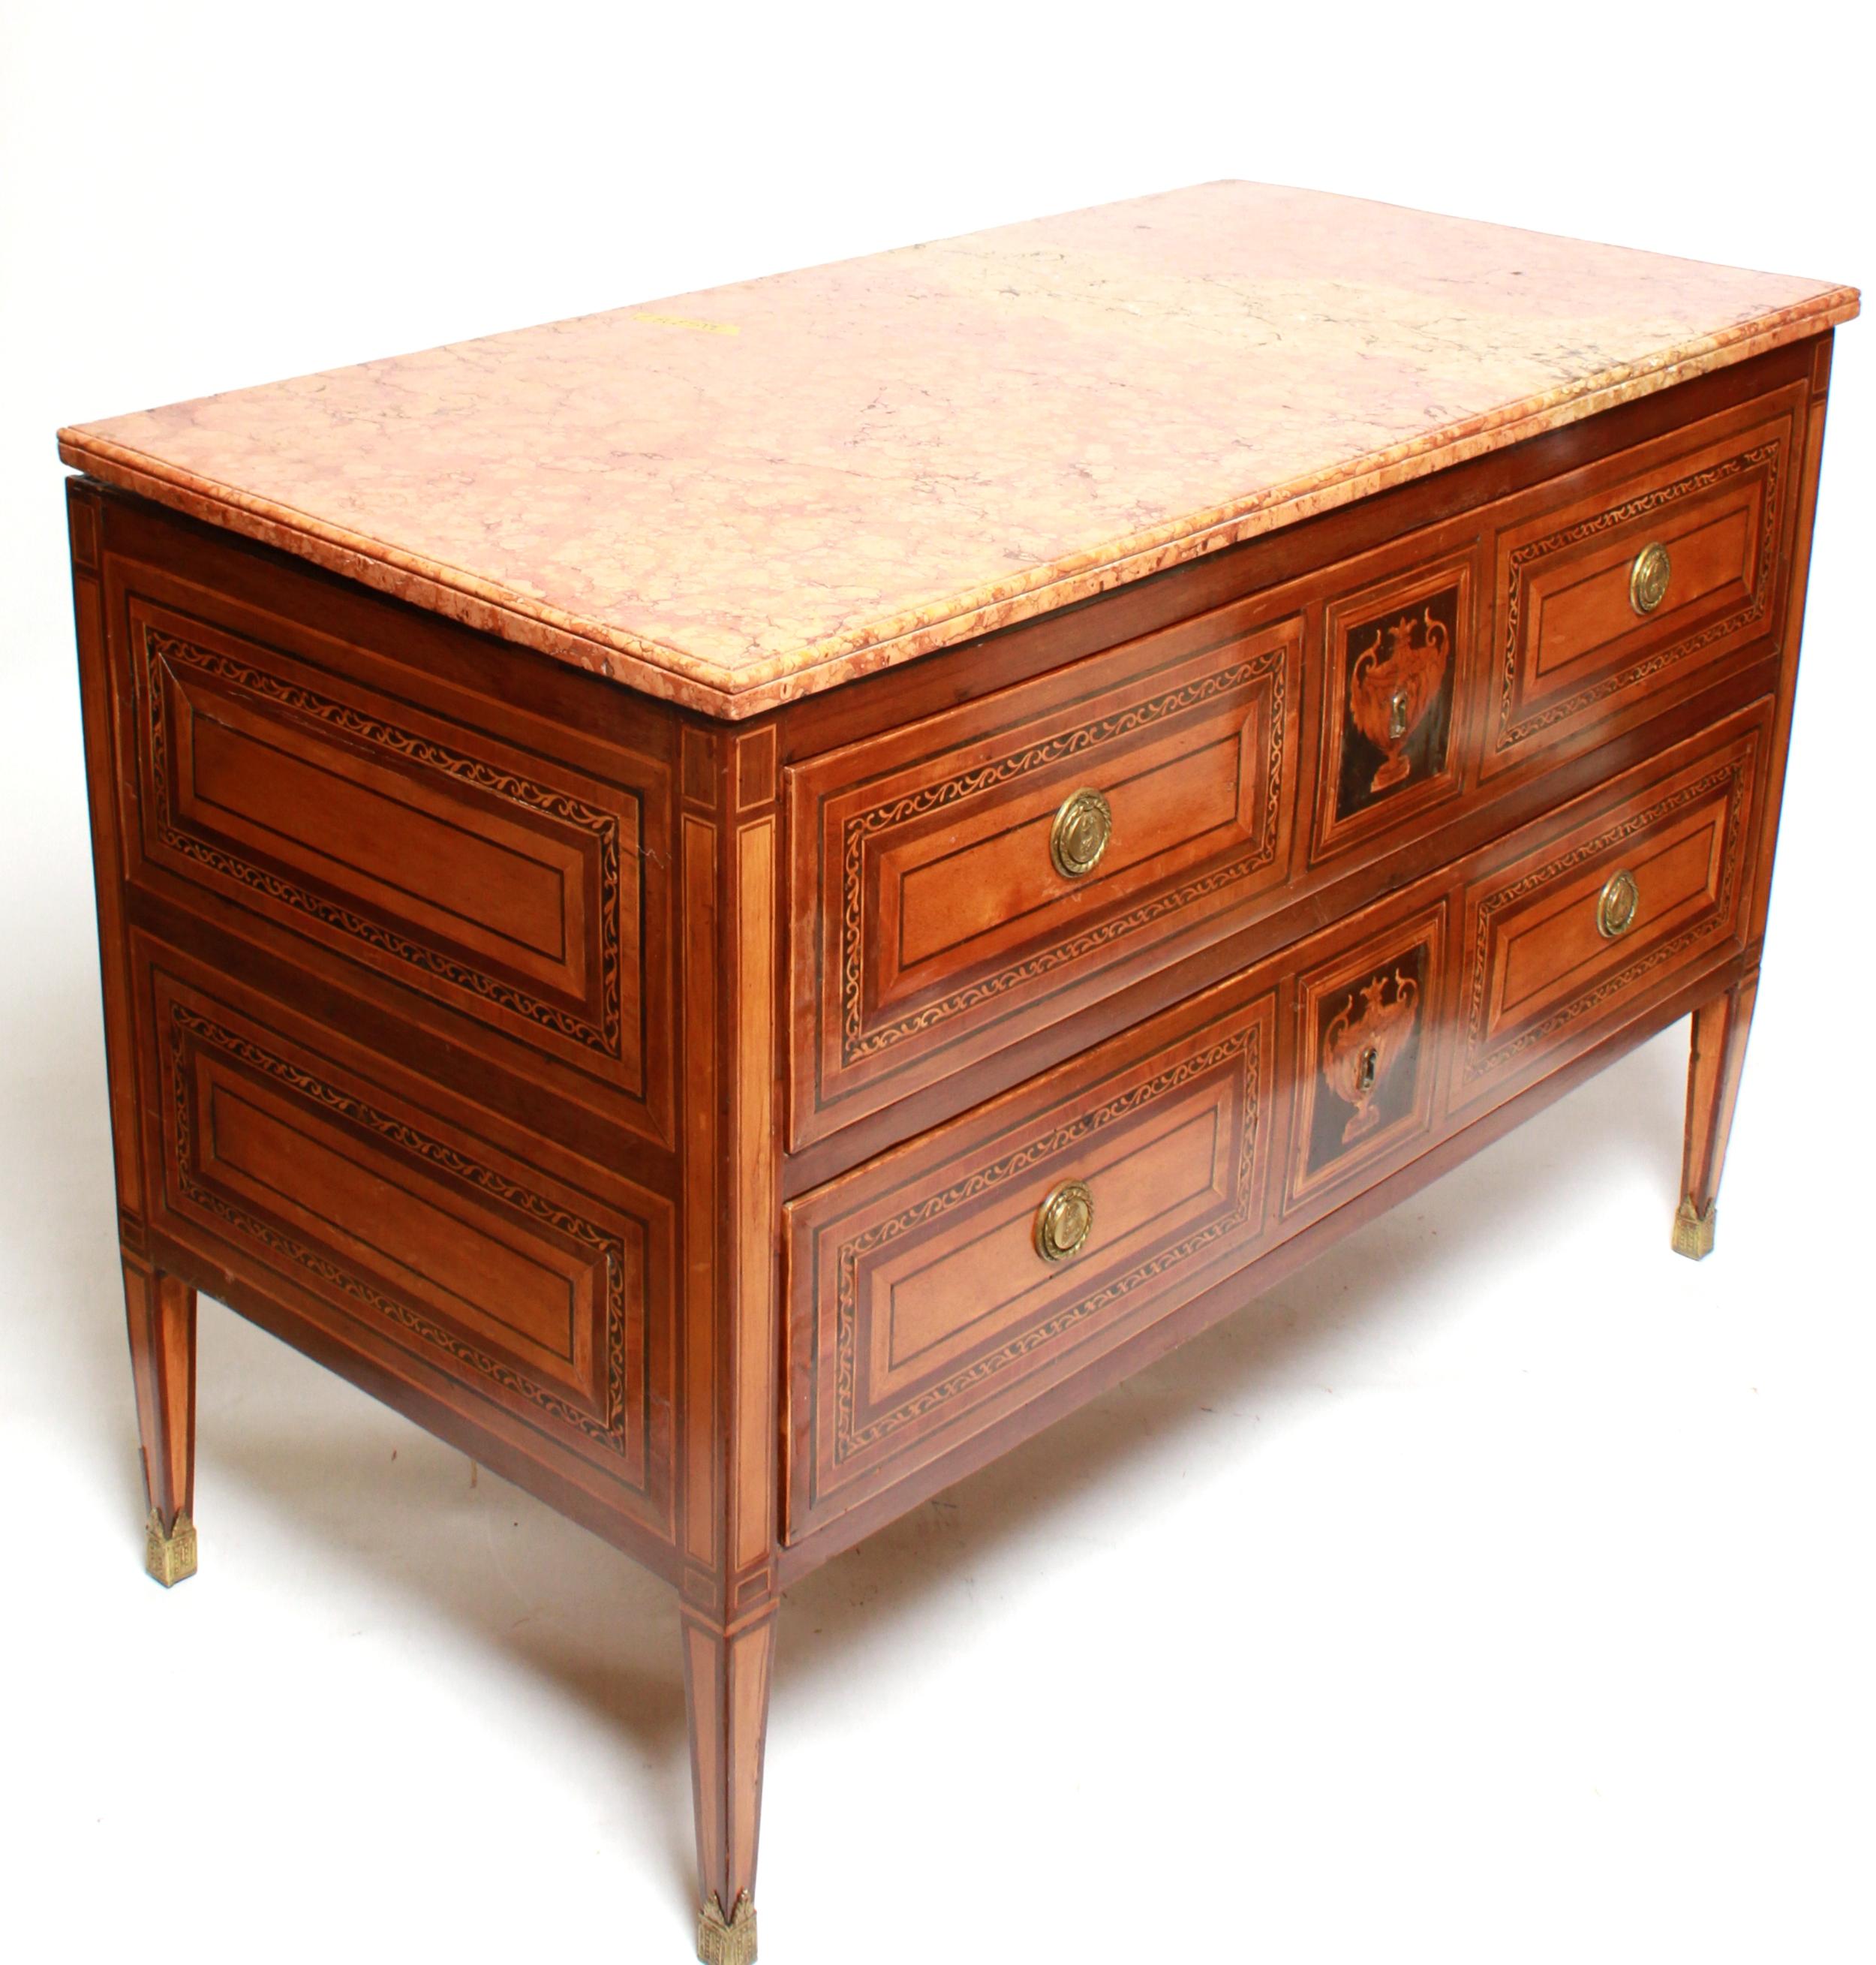 Marquetry Italian Neoclassical Commodes Attributed to Giuseppe Maggiolini